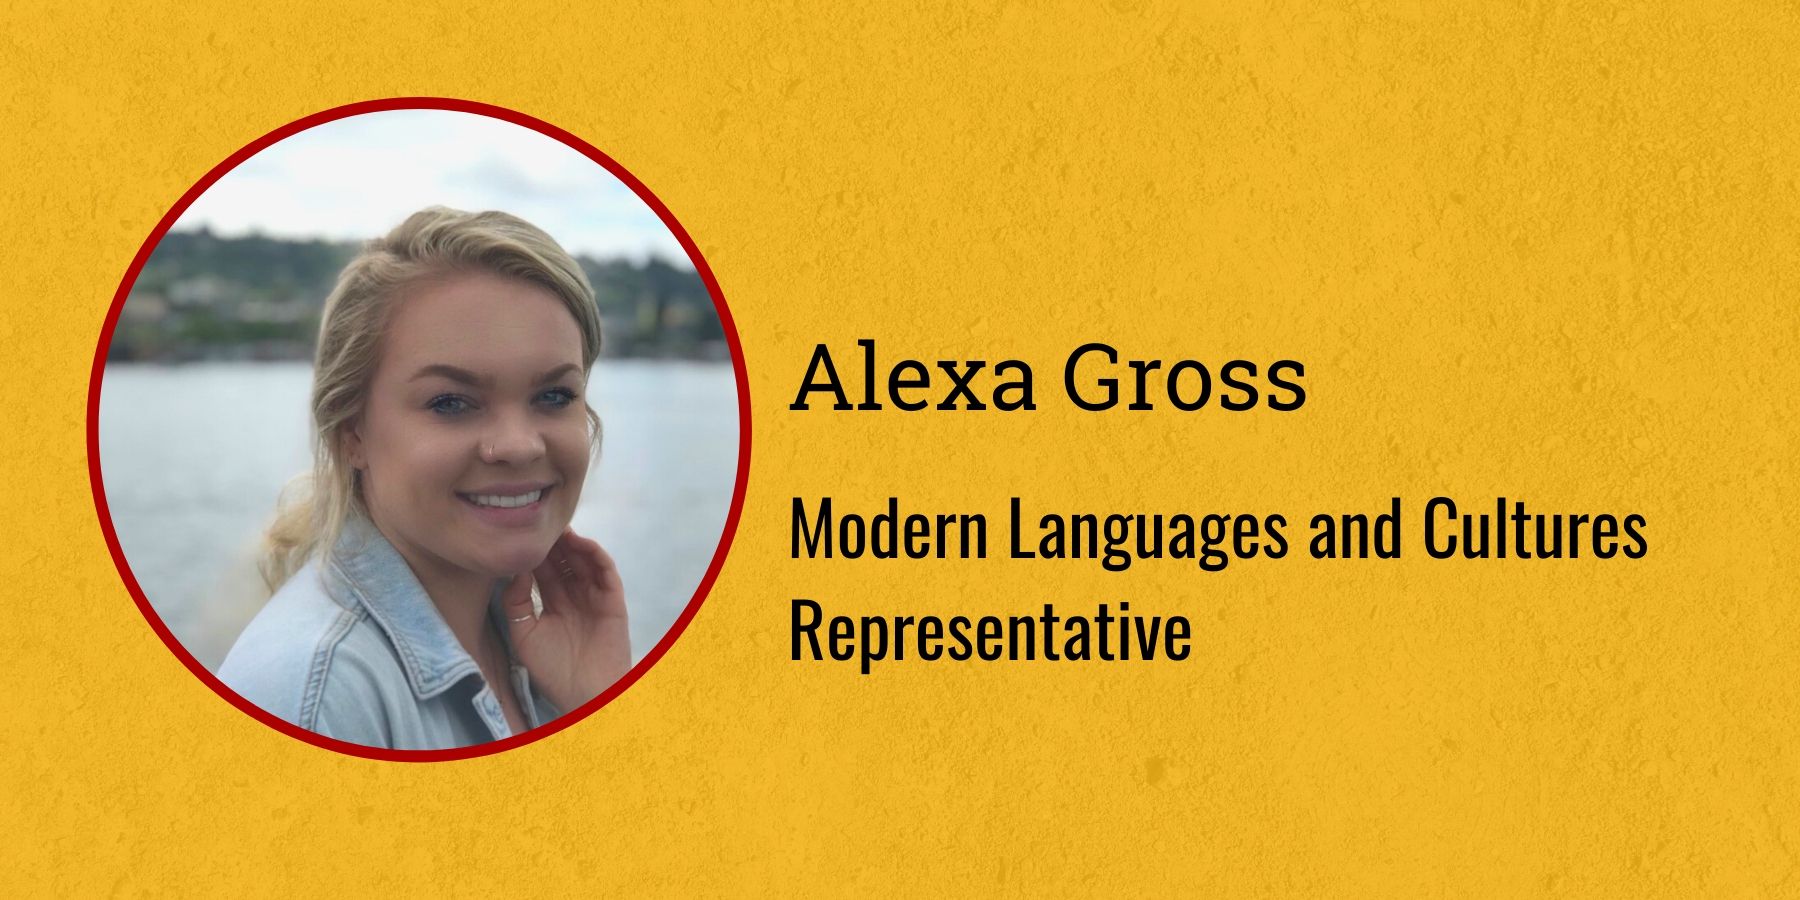 Image of Alexa Gross, and text Modern Languages and Cultures Representative